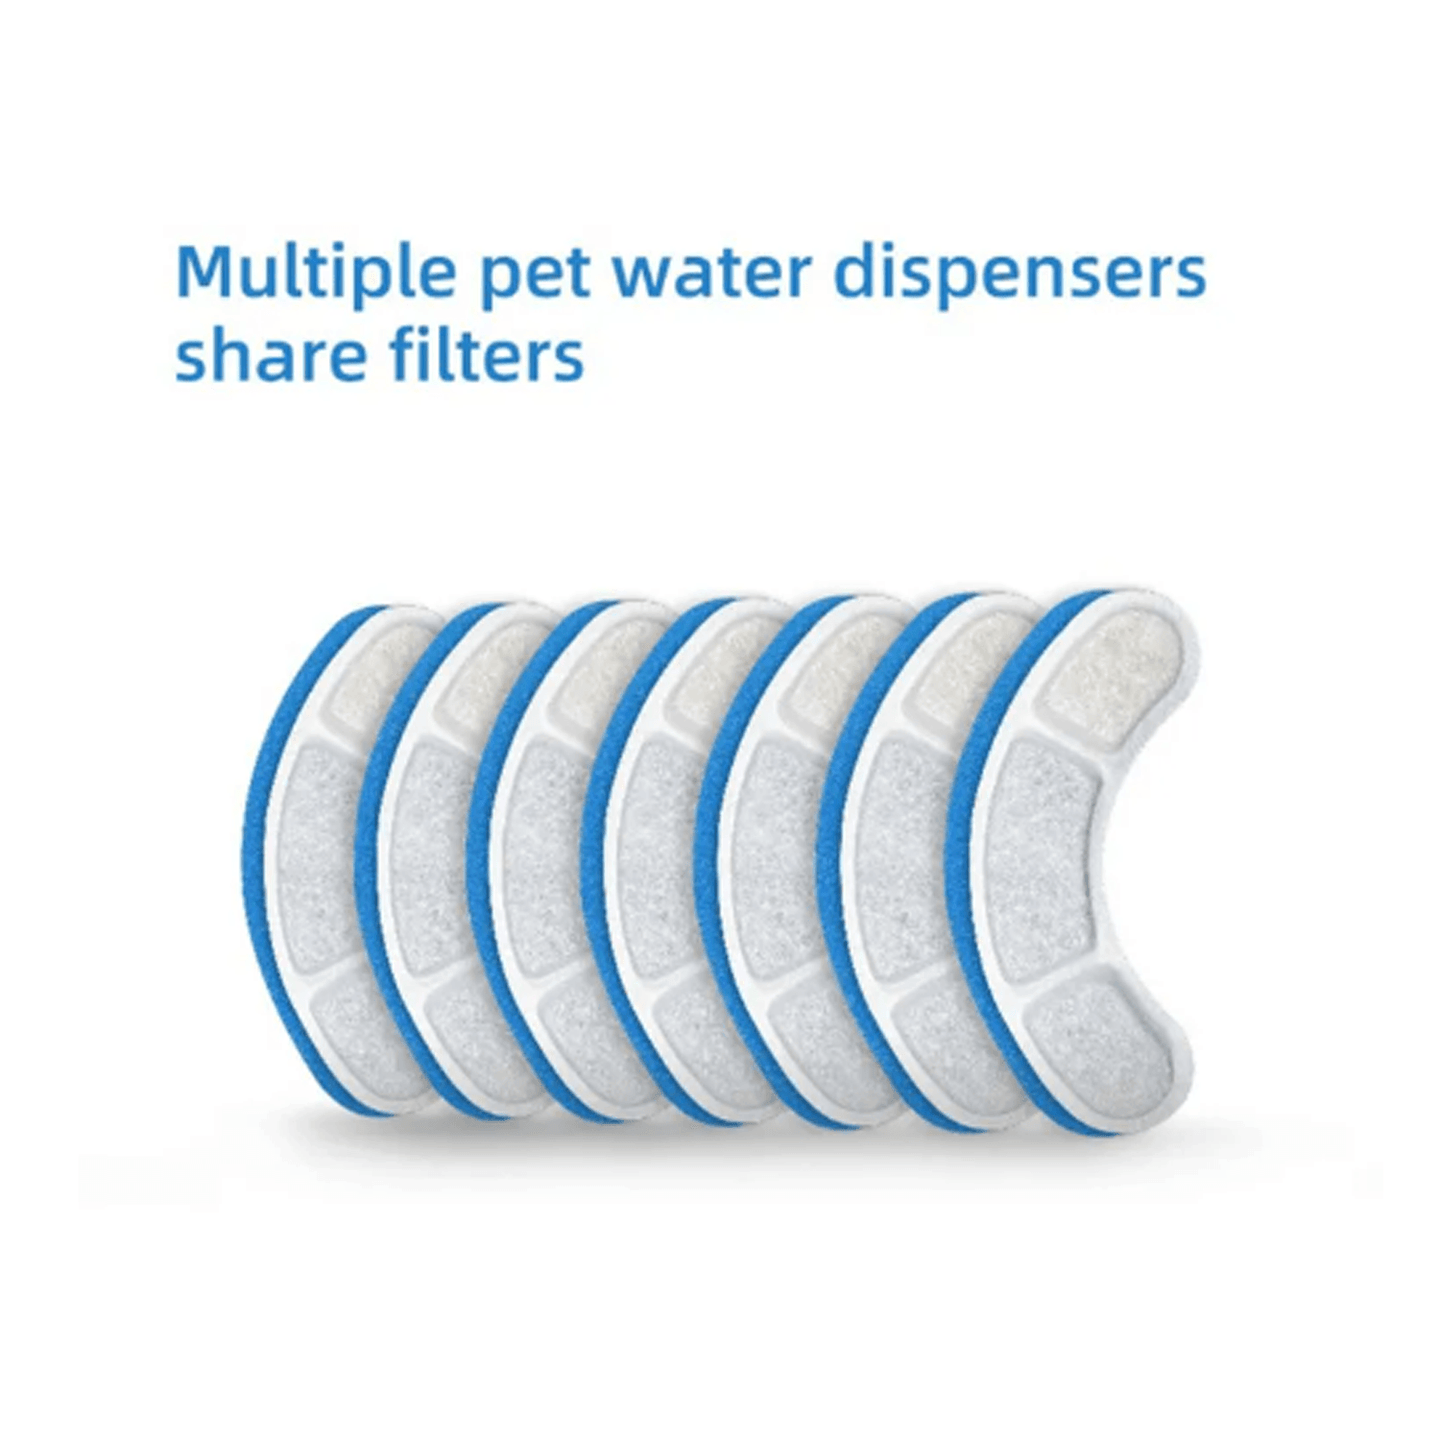 Buy 8PCS Filter Electric Pet Water Fountain Automatic Sensor Drinking Dispenser Filter discounted | Products On Sale Australia